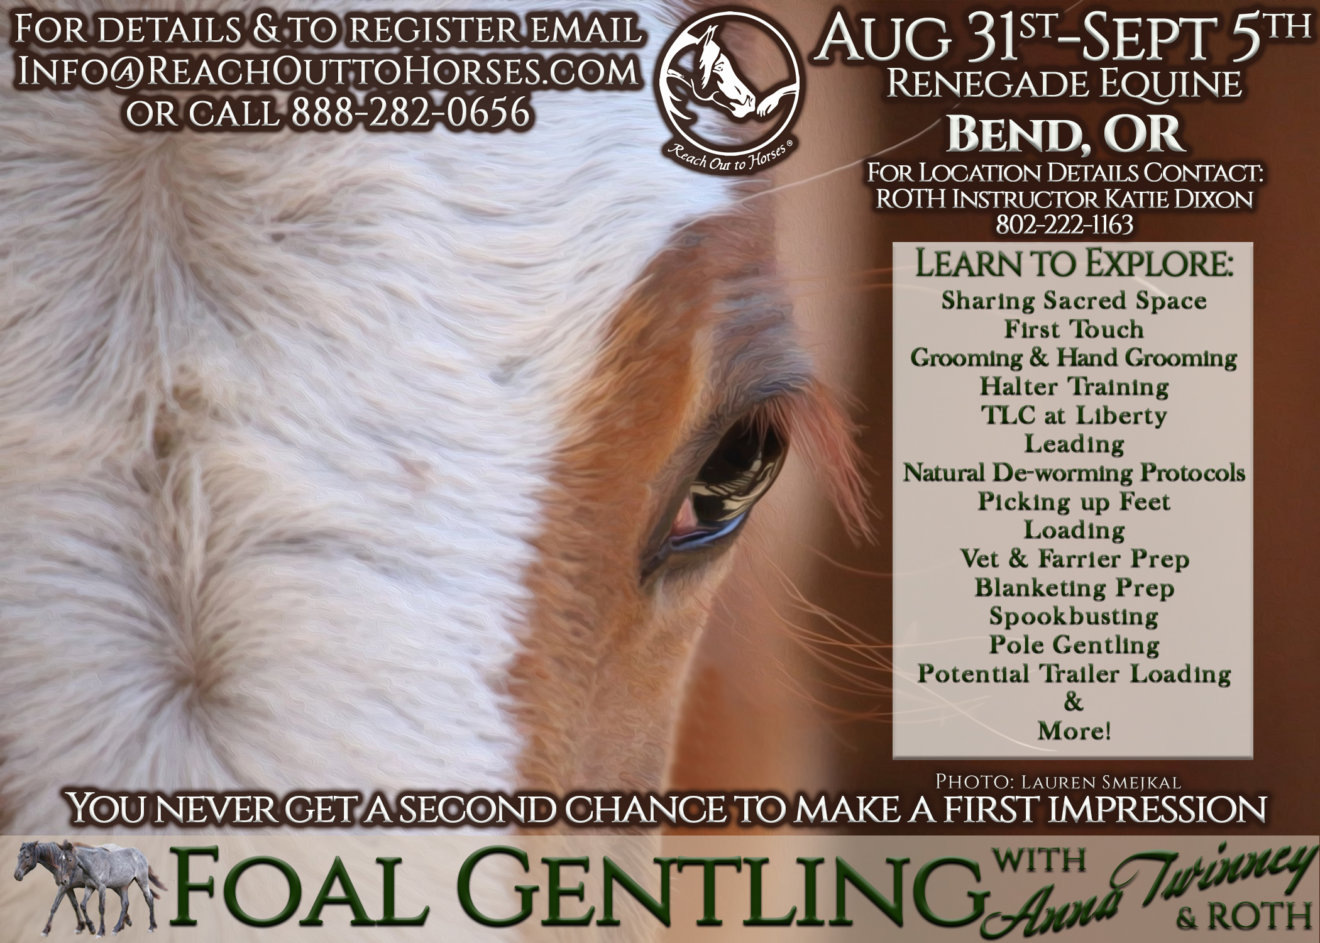 Reach Out to Horses Wild Foal Gentling Course-  Only Auditing Available at this time